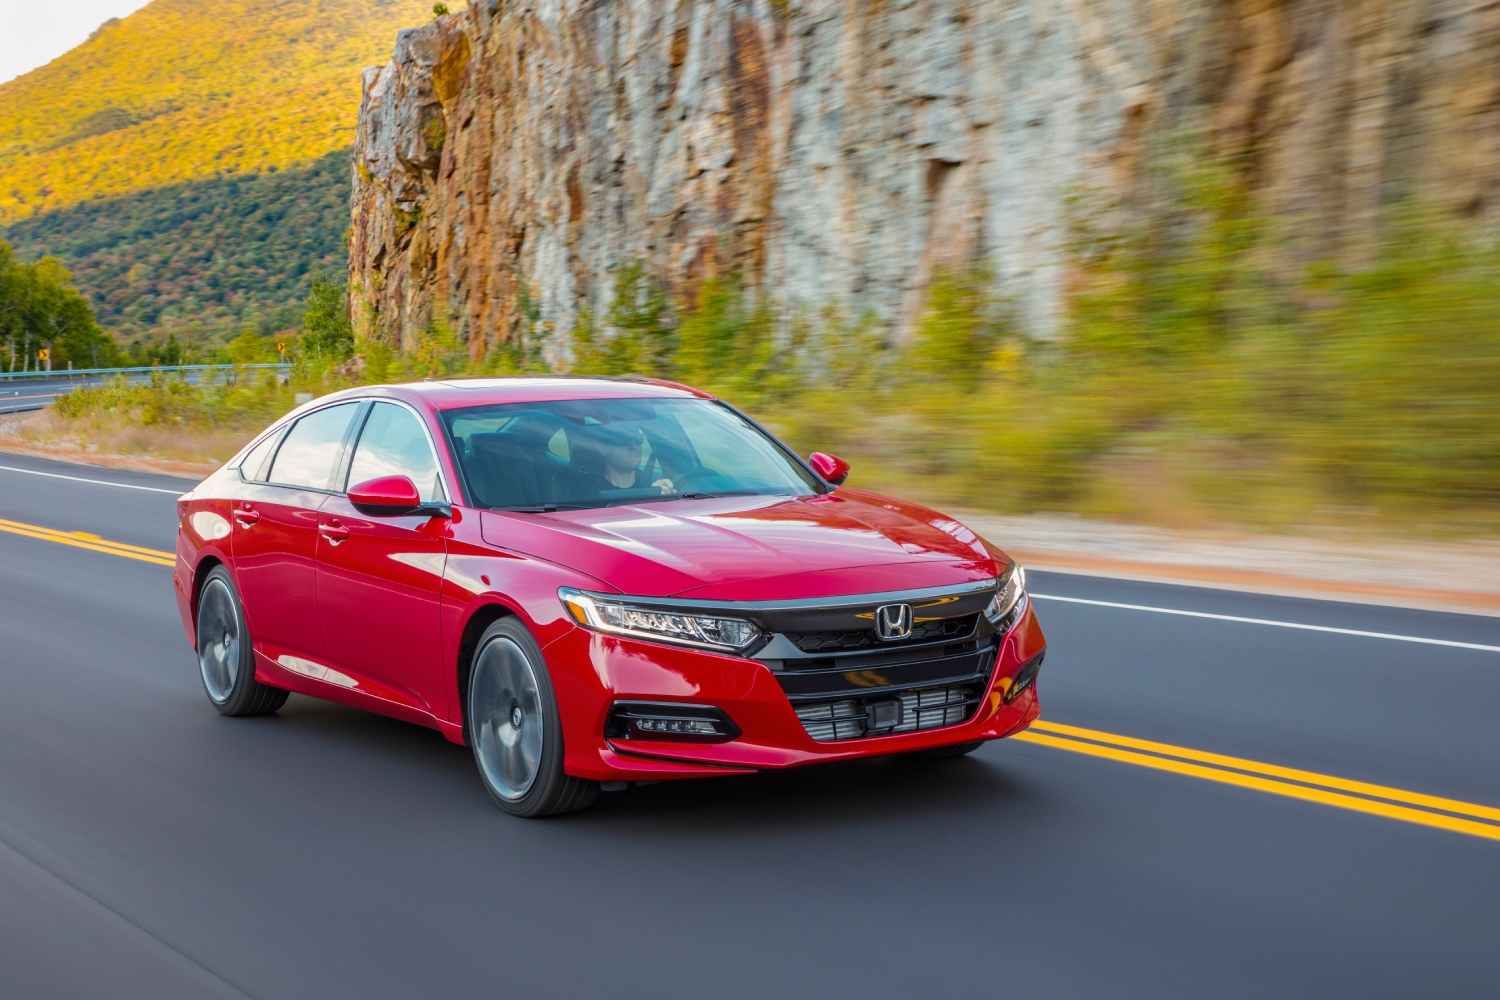 The best used Honda Civic years to look for includes the 2019 one pictured here